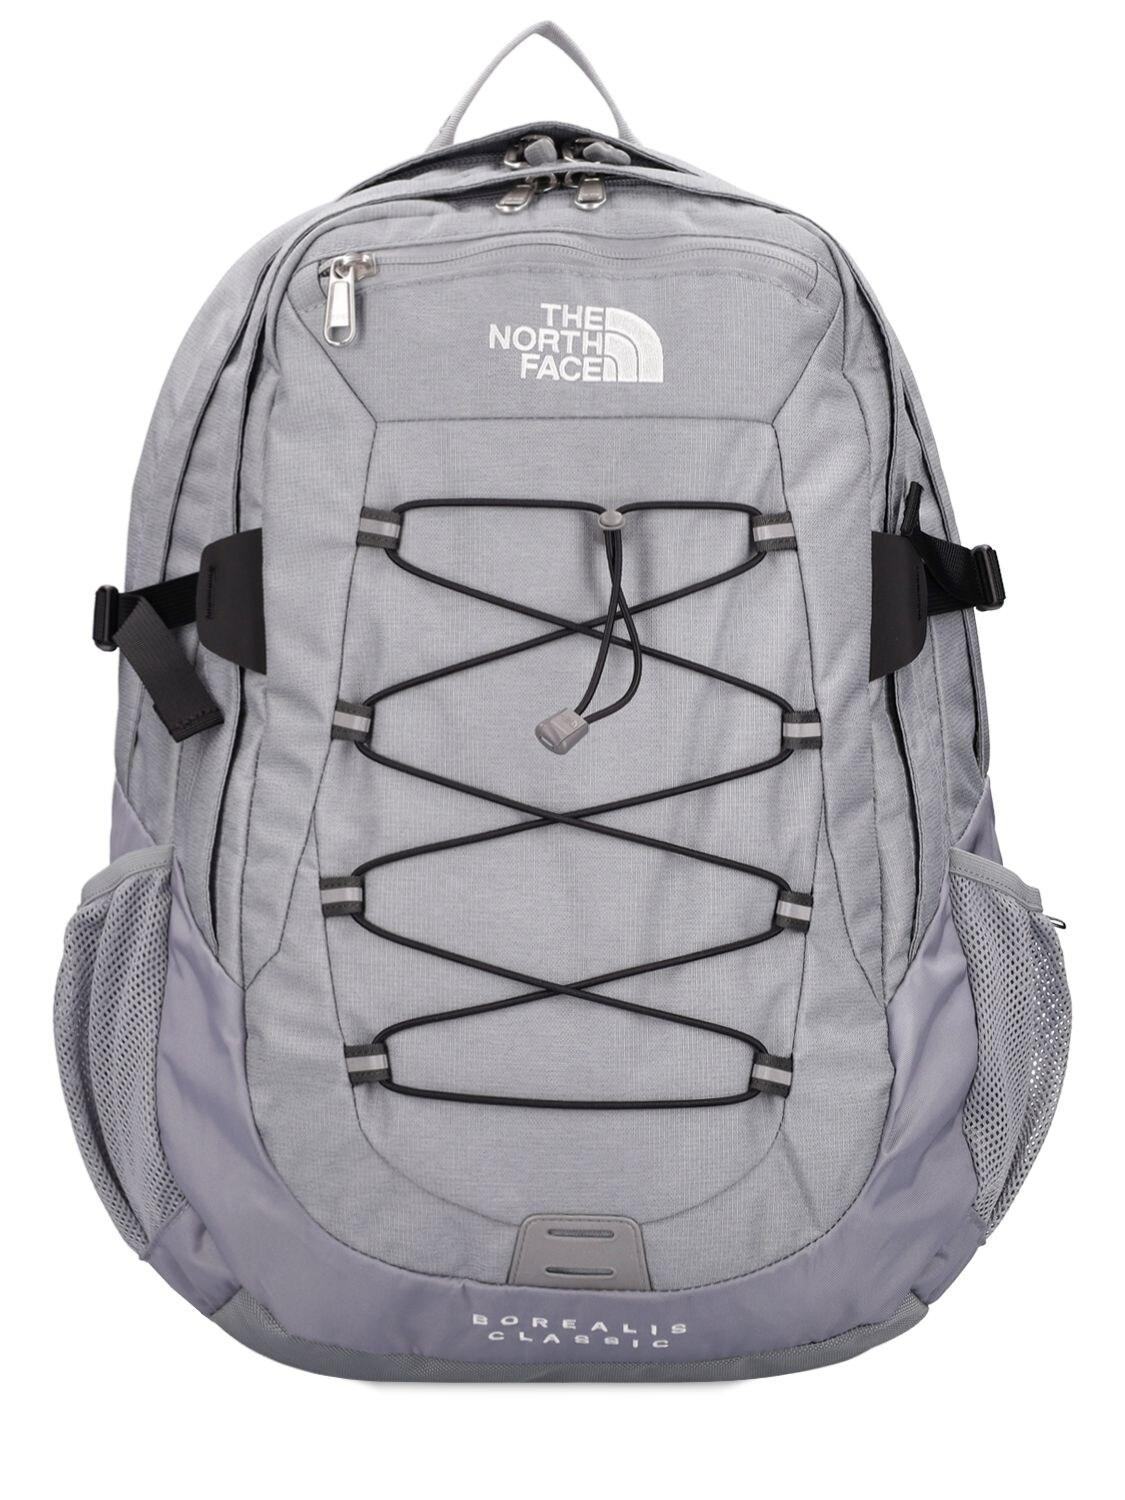 The North Face 29l Borealis Classic Nylon Backpack in Grey | Lyst Canada